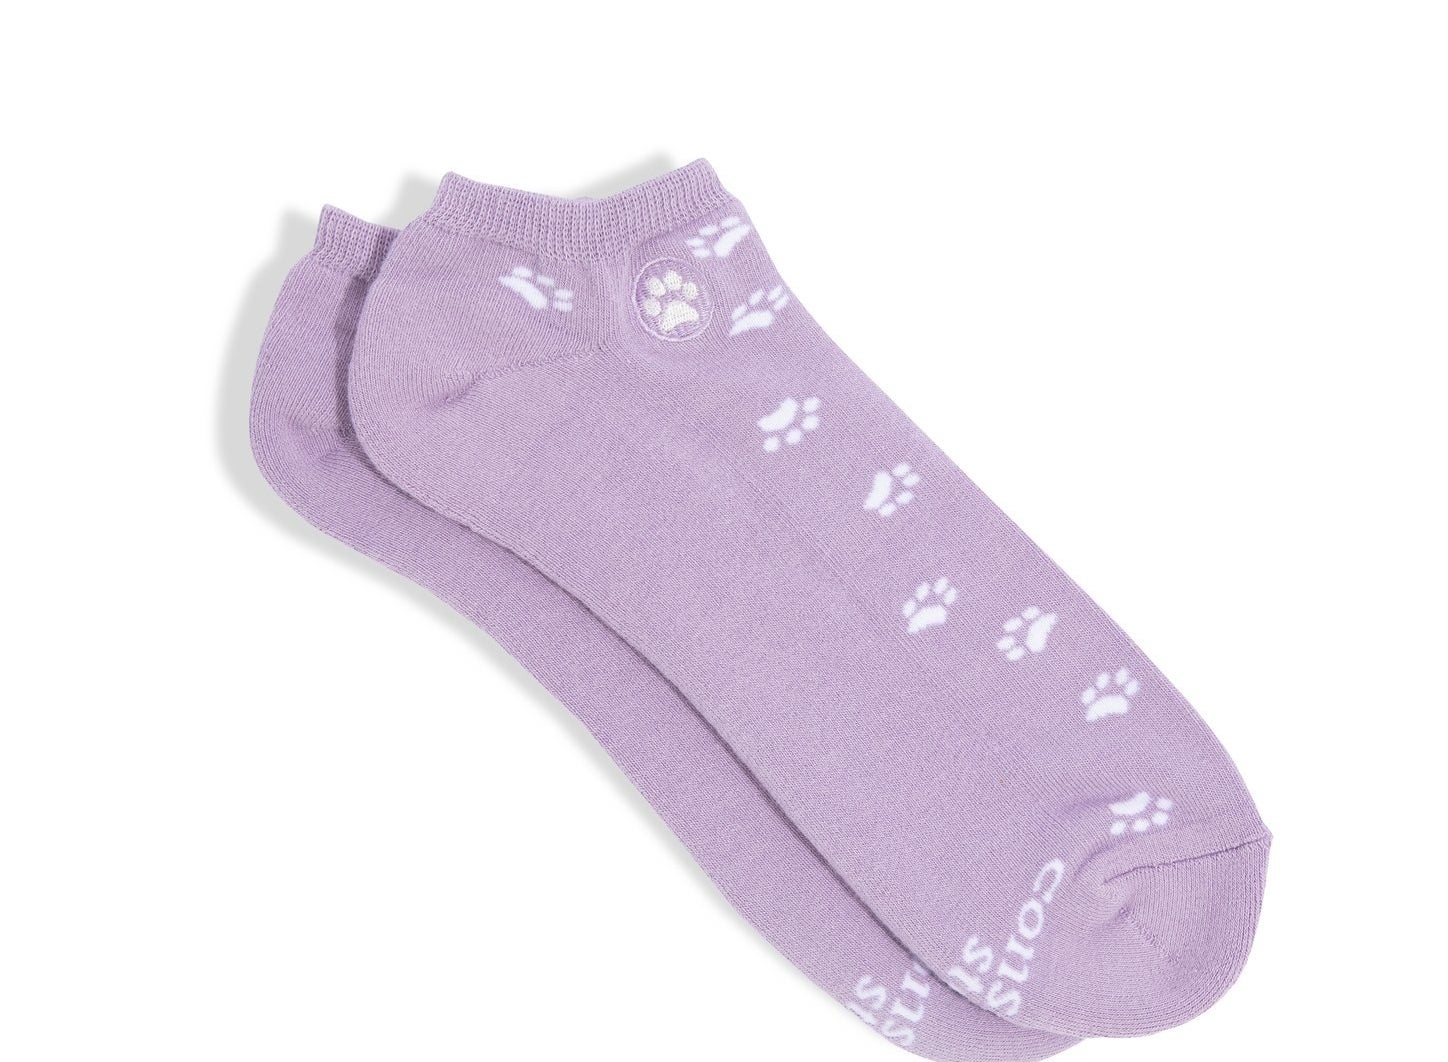 A pair of purple ankle socks with dog paws on them